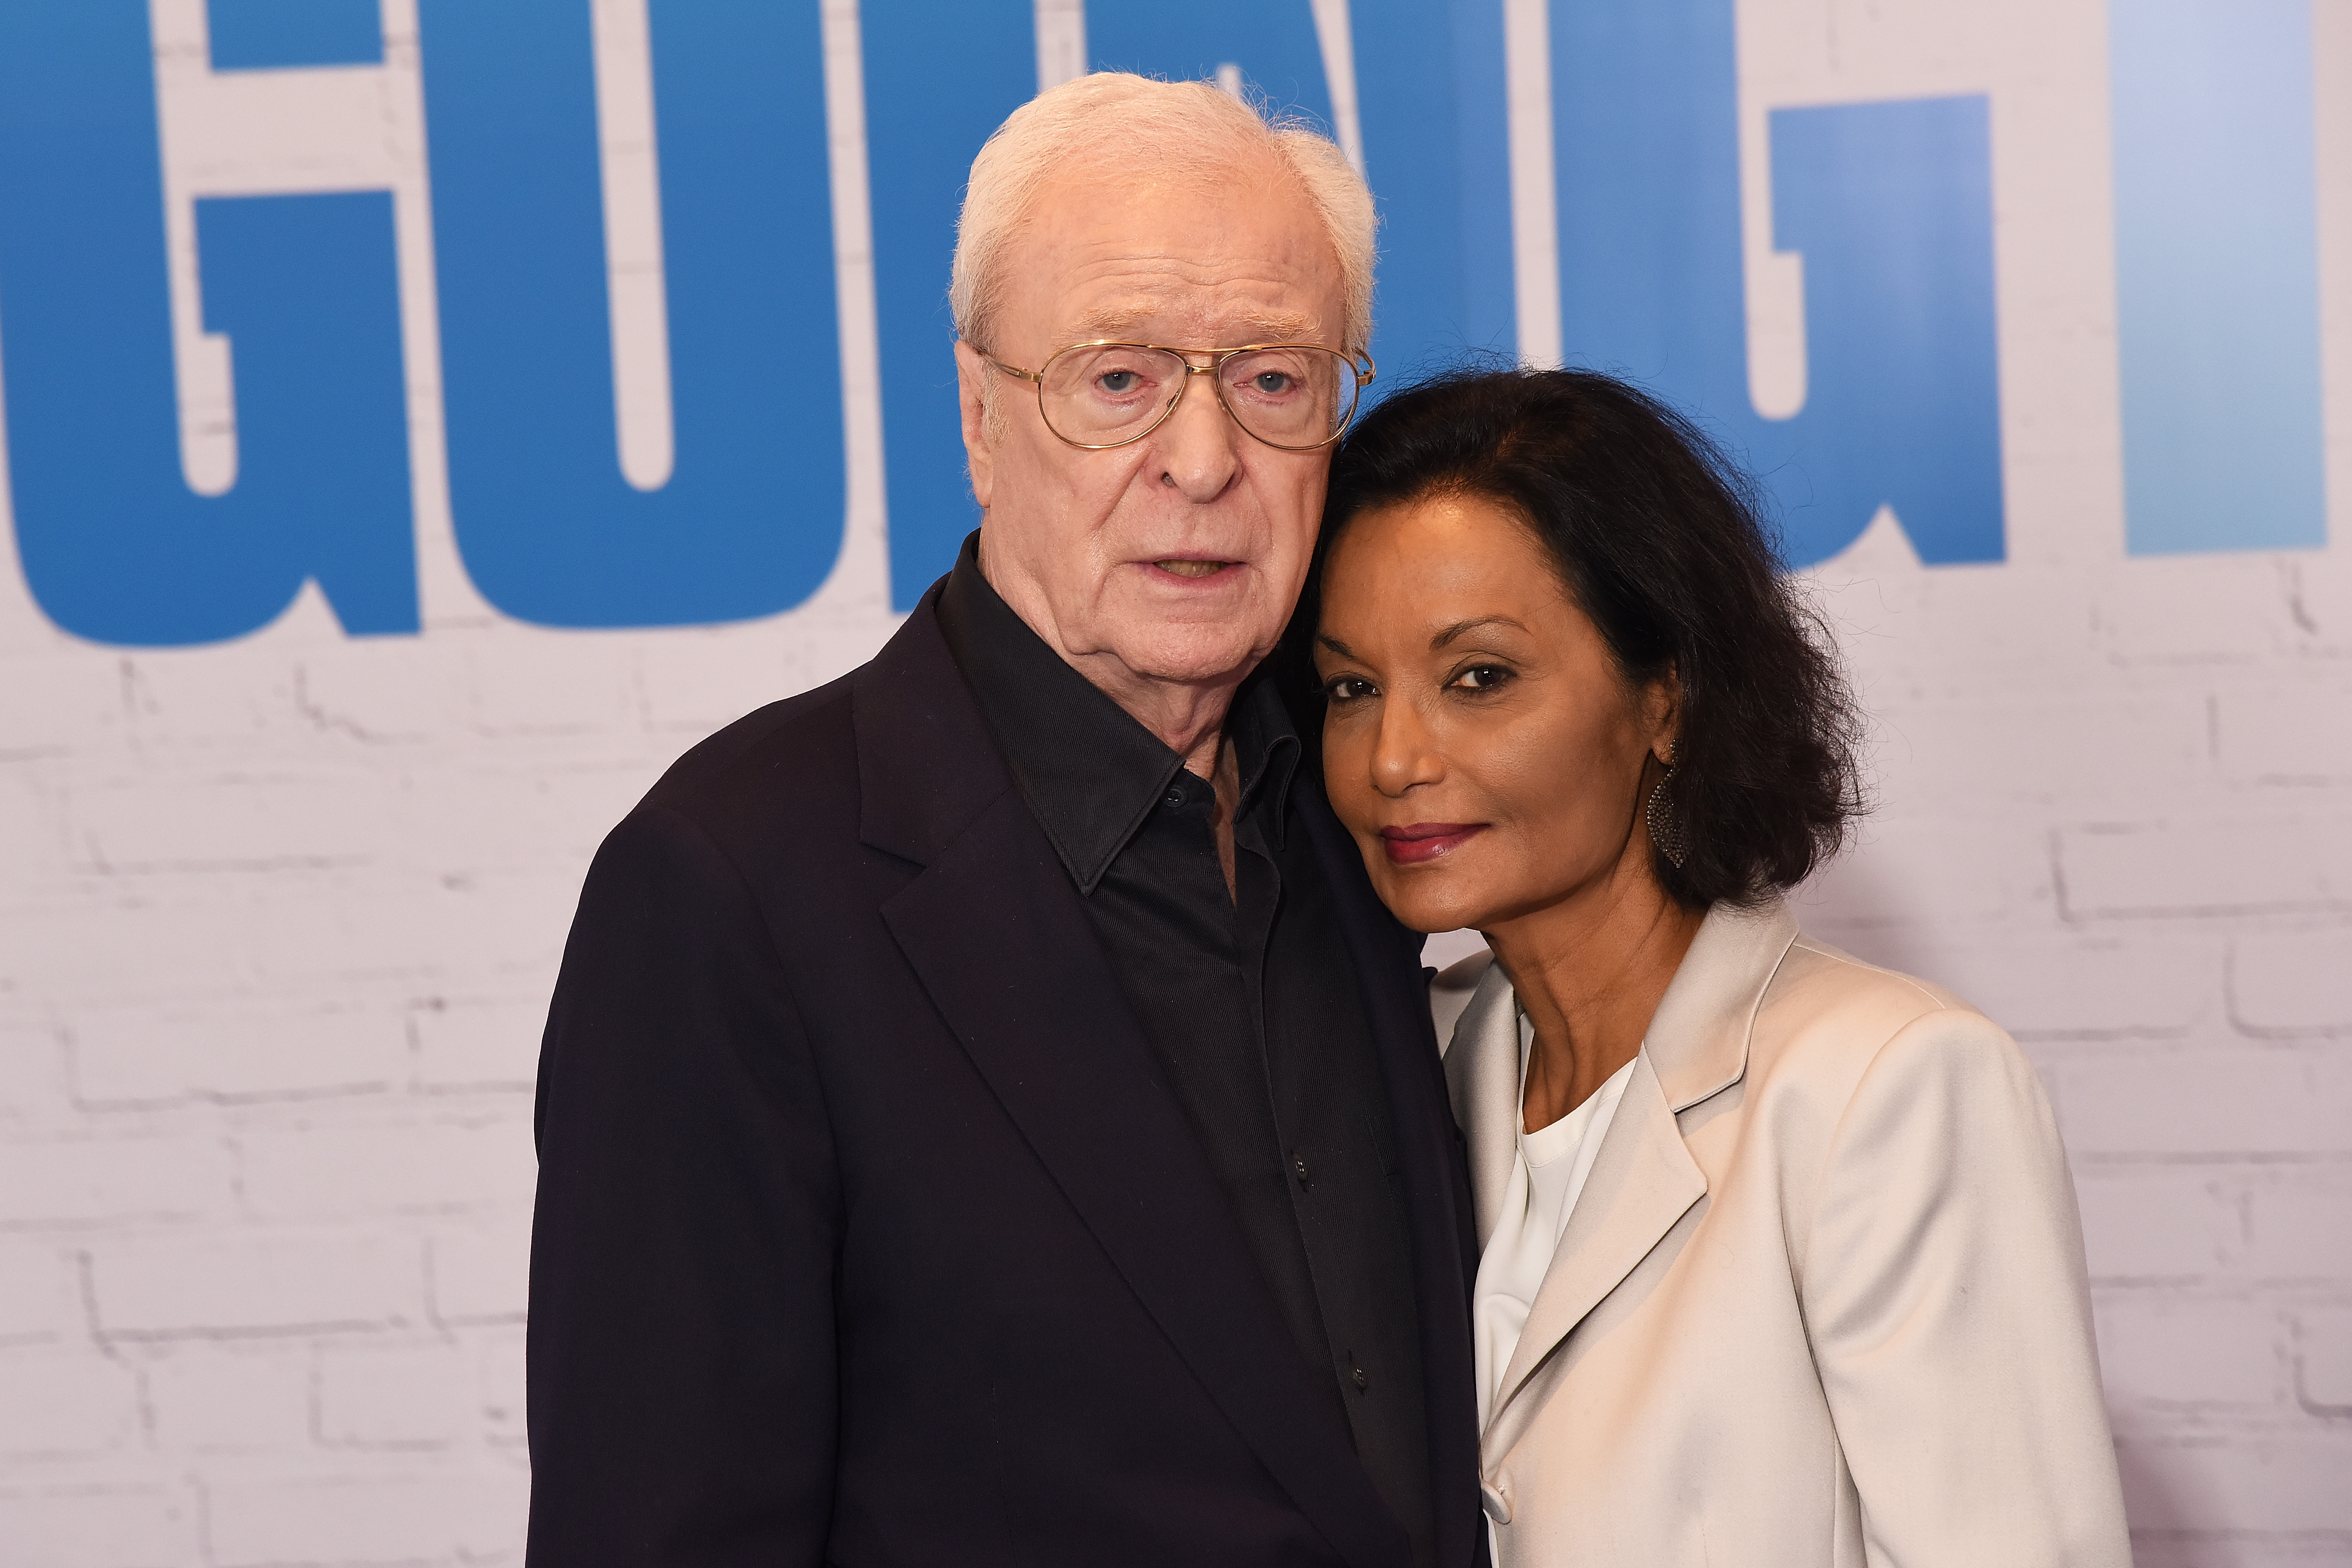 Michael Caine and Shakira Caine attend the Going In Style special screening on April 5, 2017, in London. | Source: Getty Images